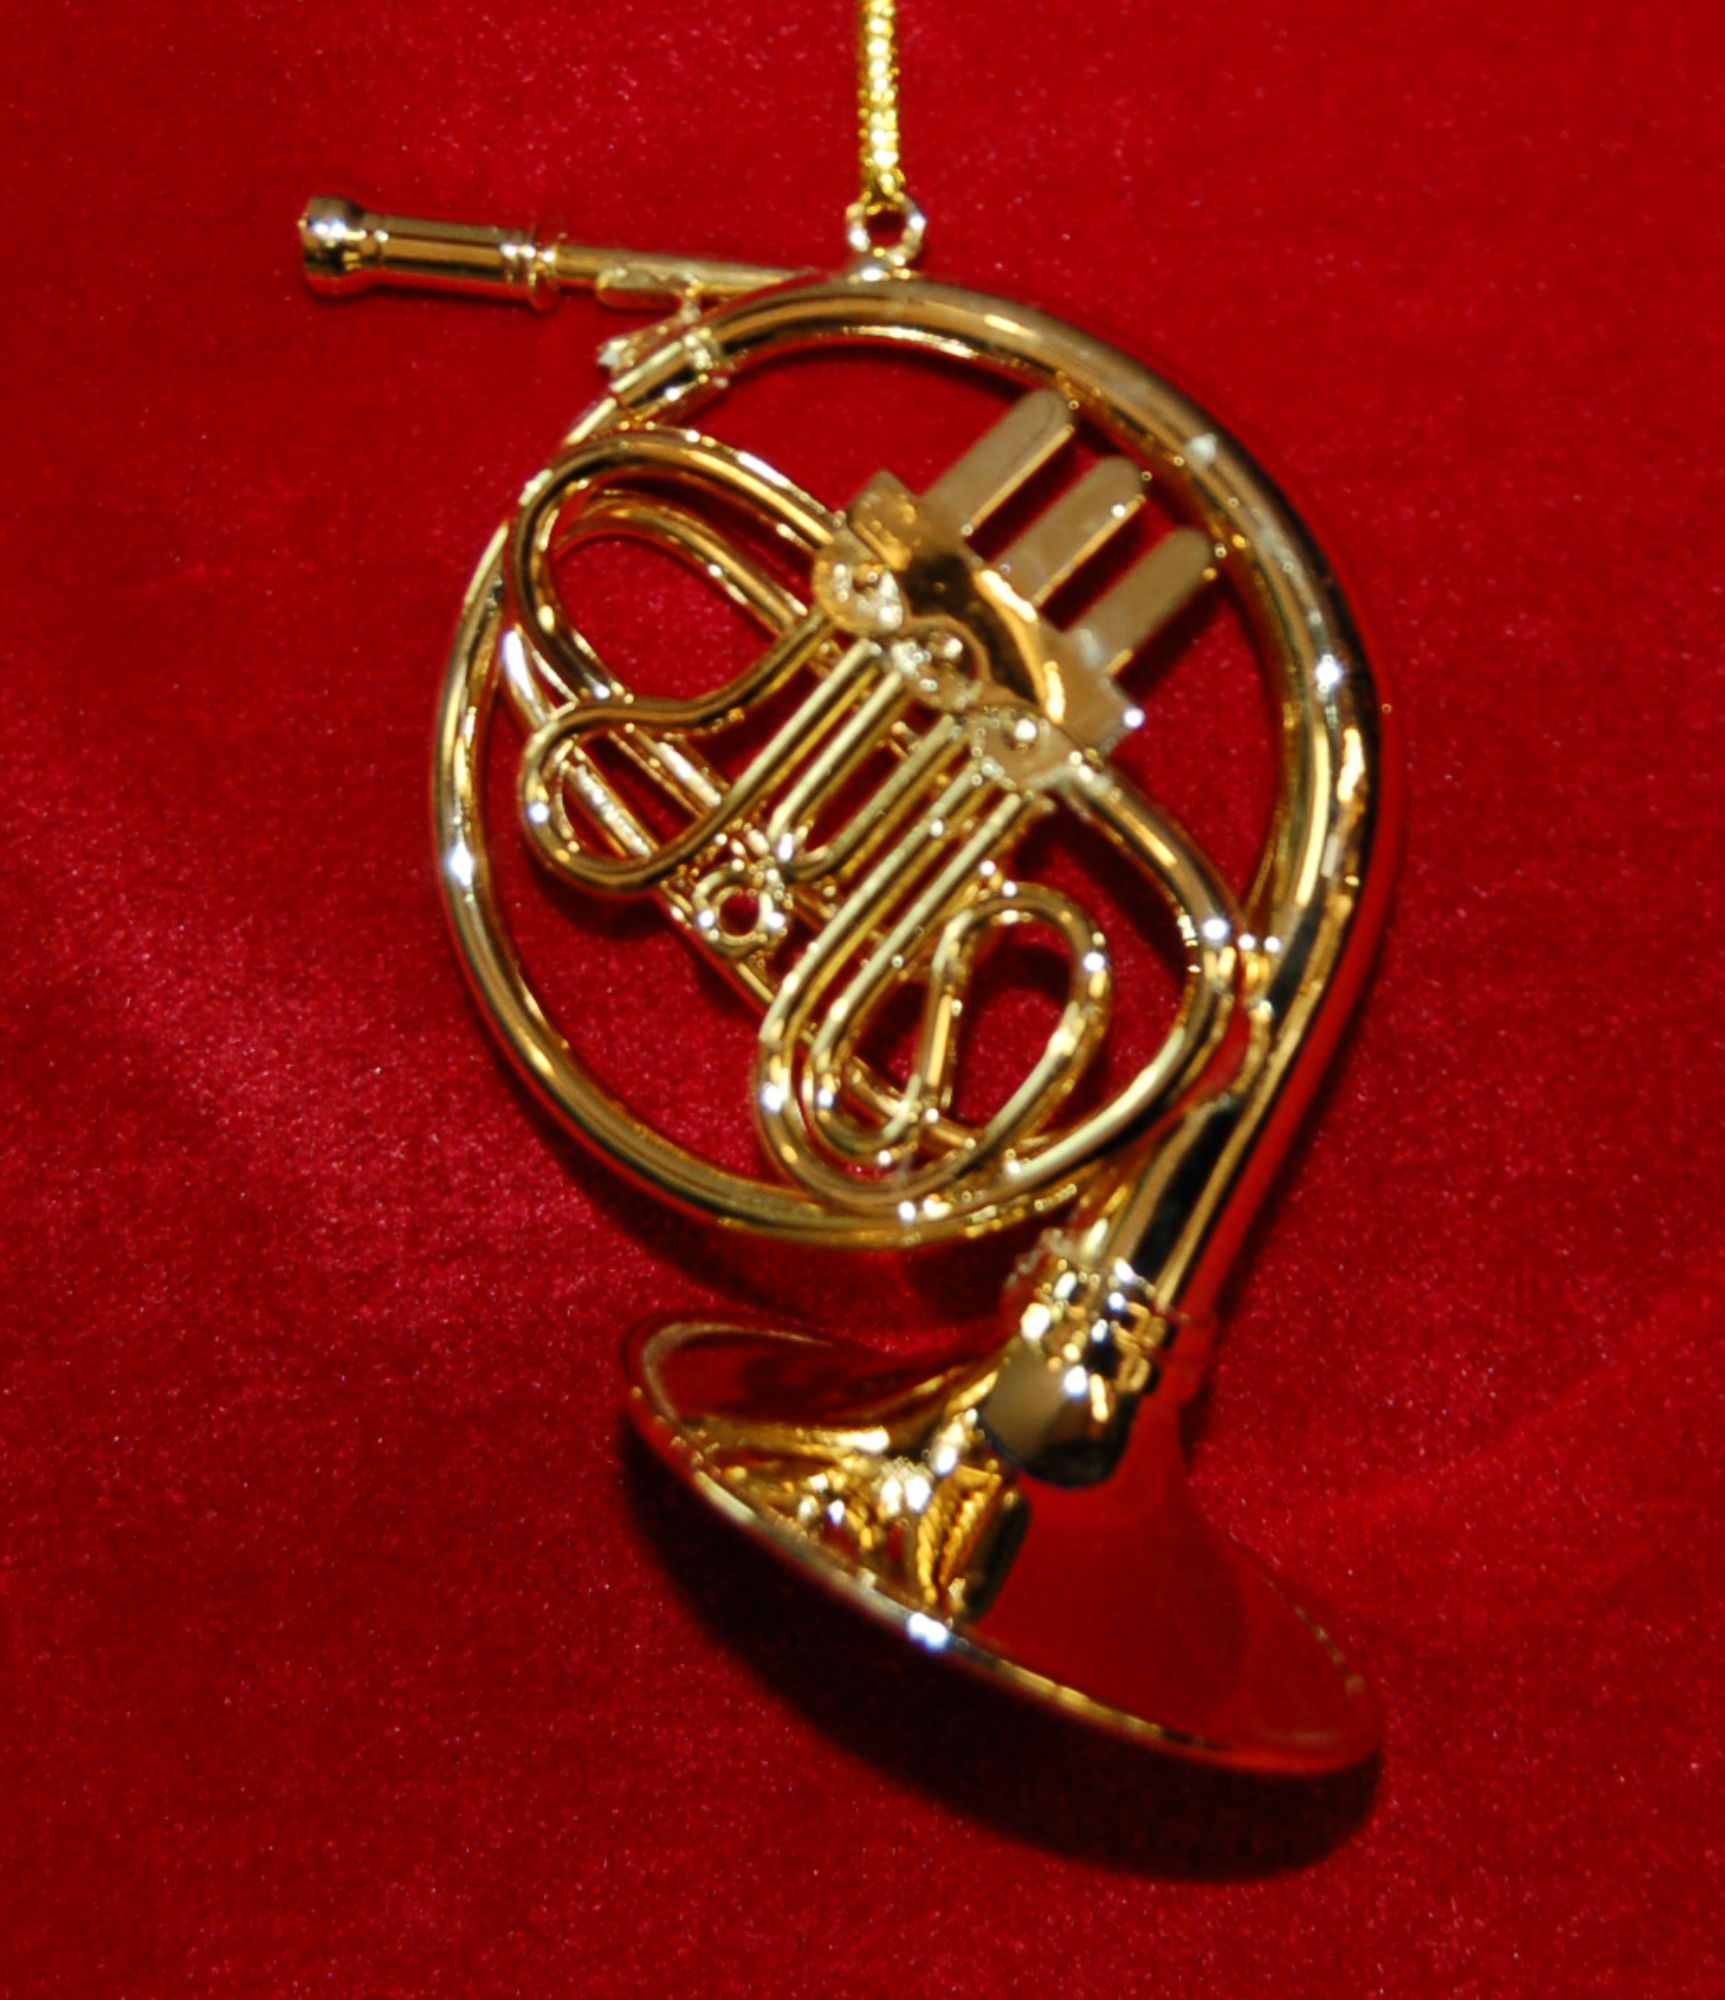 french-horn-hand-personalized-christmas-ornaments-by-russell-rhodes